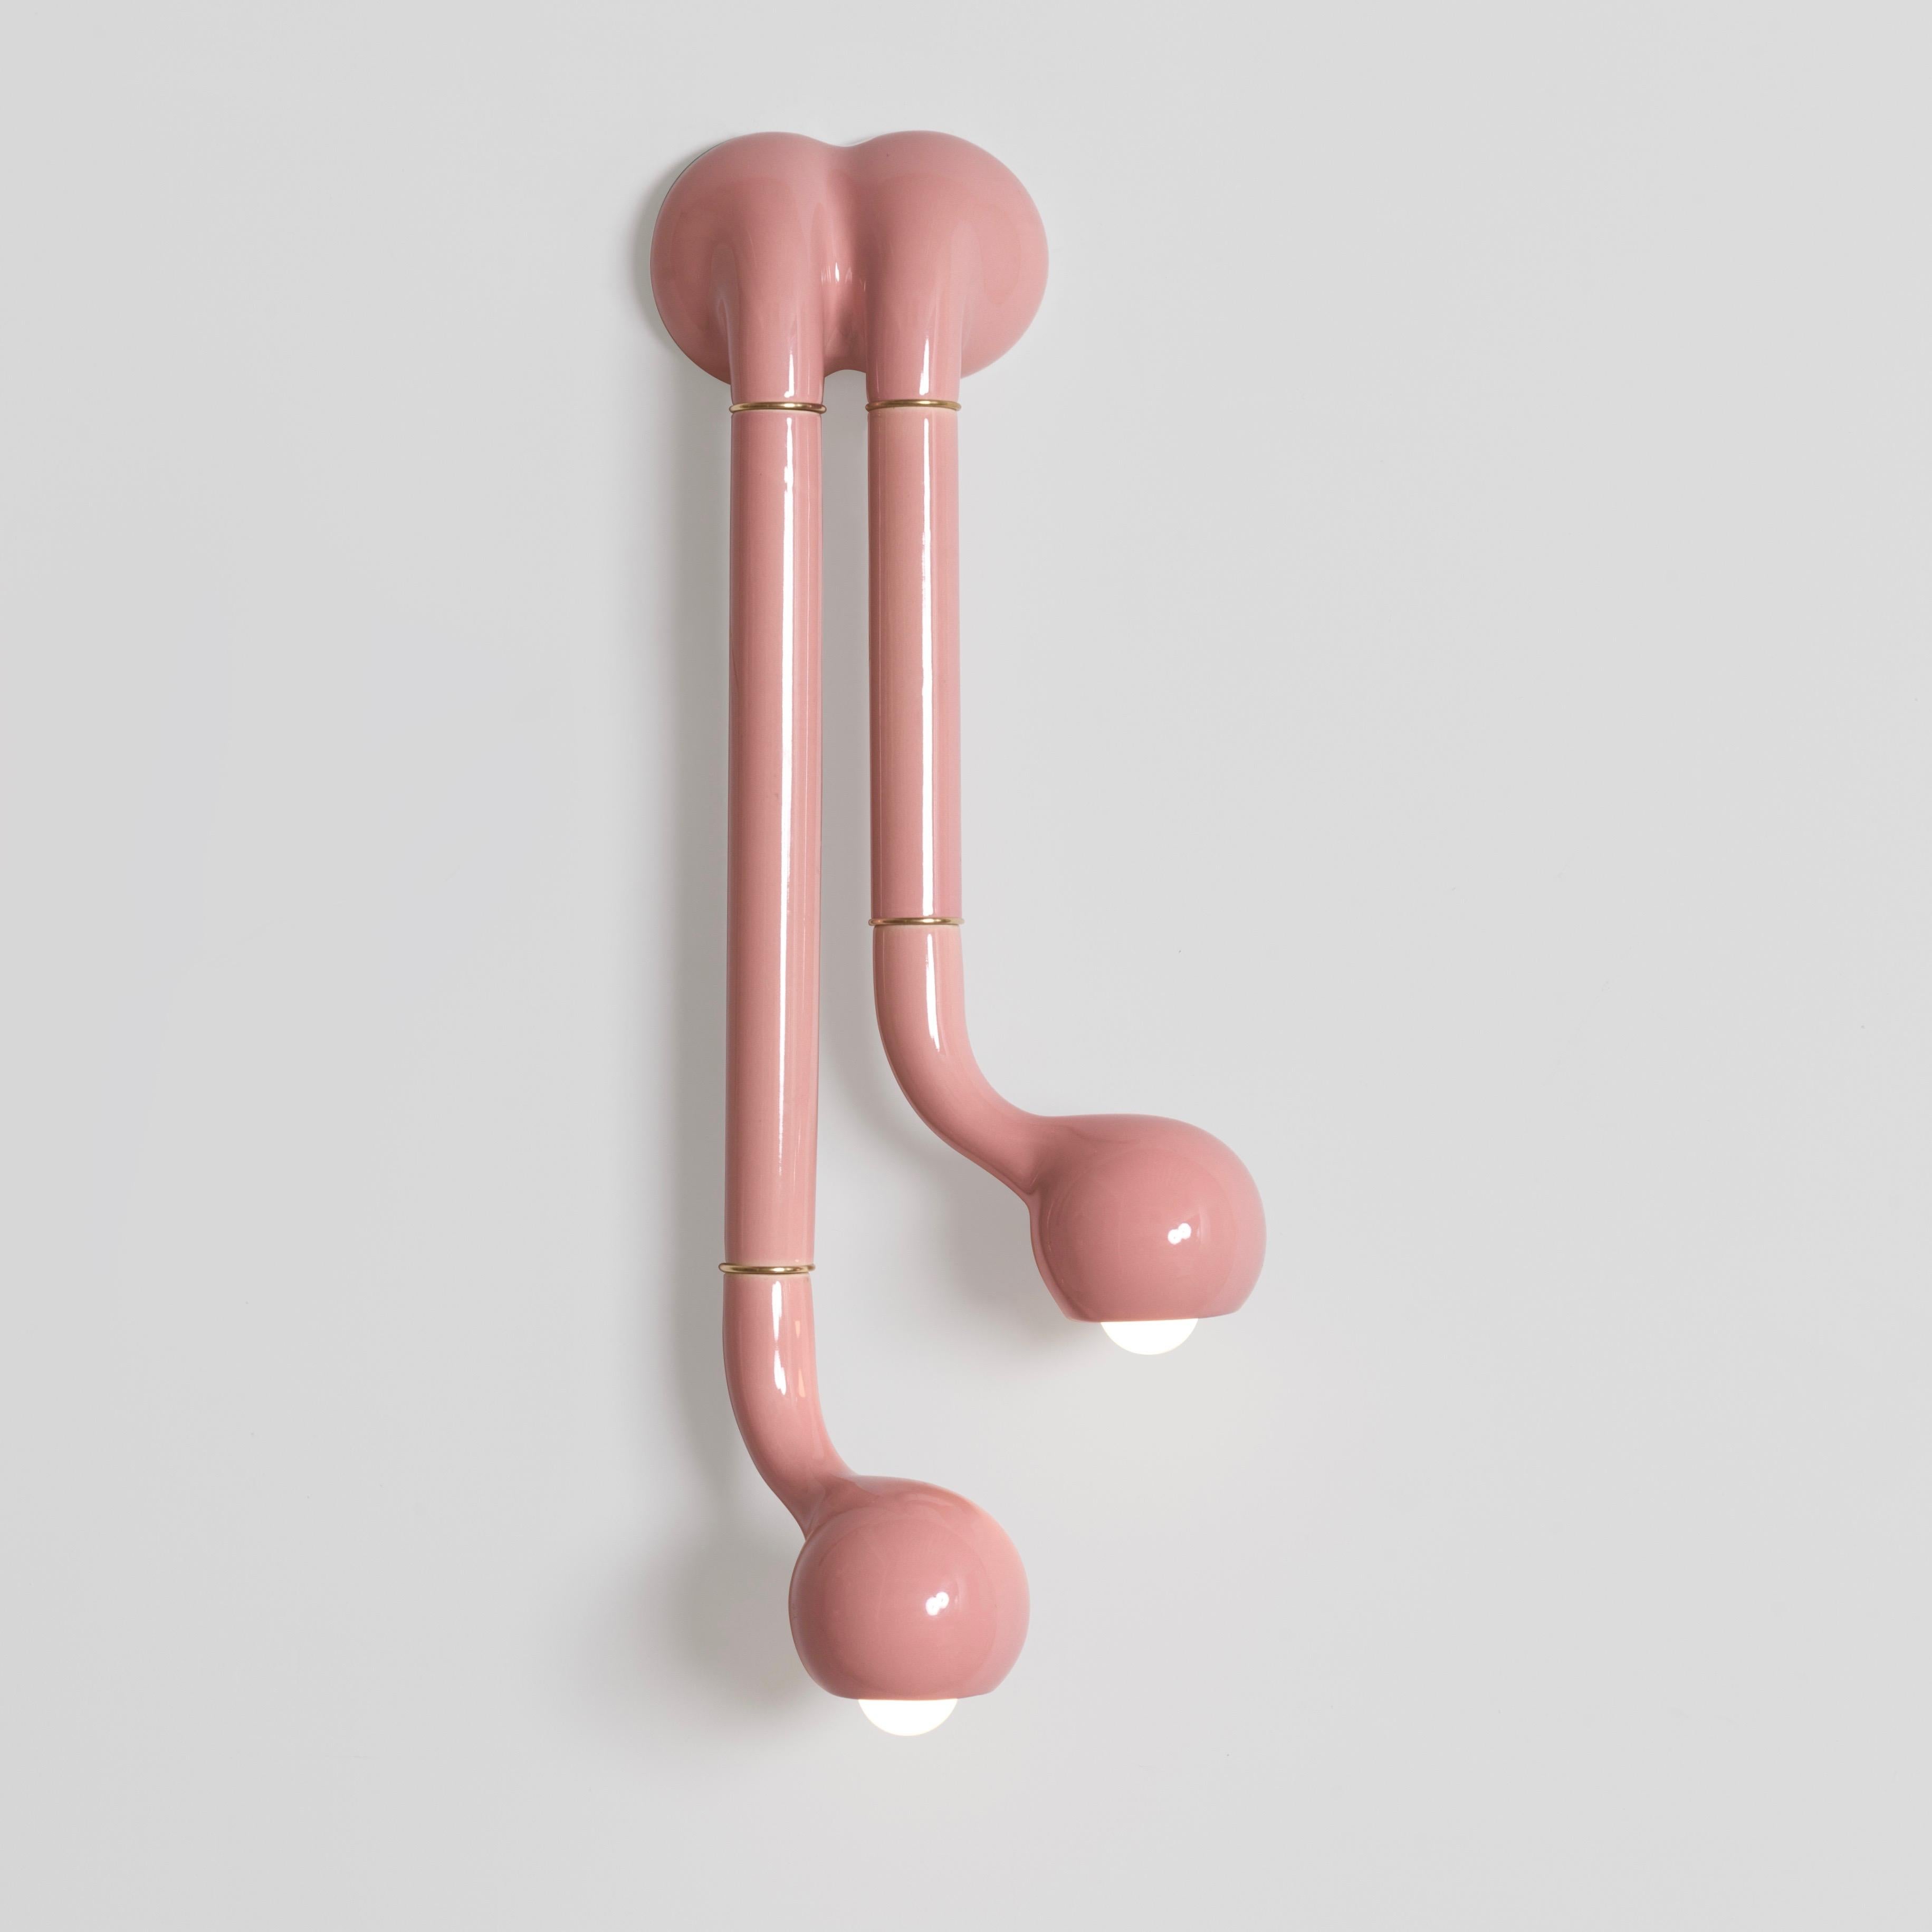 Entler ceramic 2-globe sconce.

Made to order in our Los Angeles studio. 

Glazes available in gloss pink, matte white, matte black, gloss black, matte pink, gloss white, yellow, charcoal, blue, burnt orange, chartreuse, cherry, lavender, and